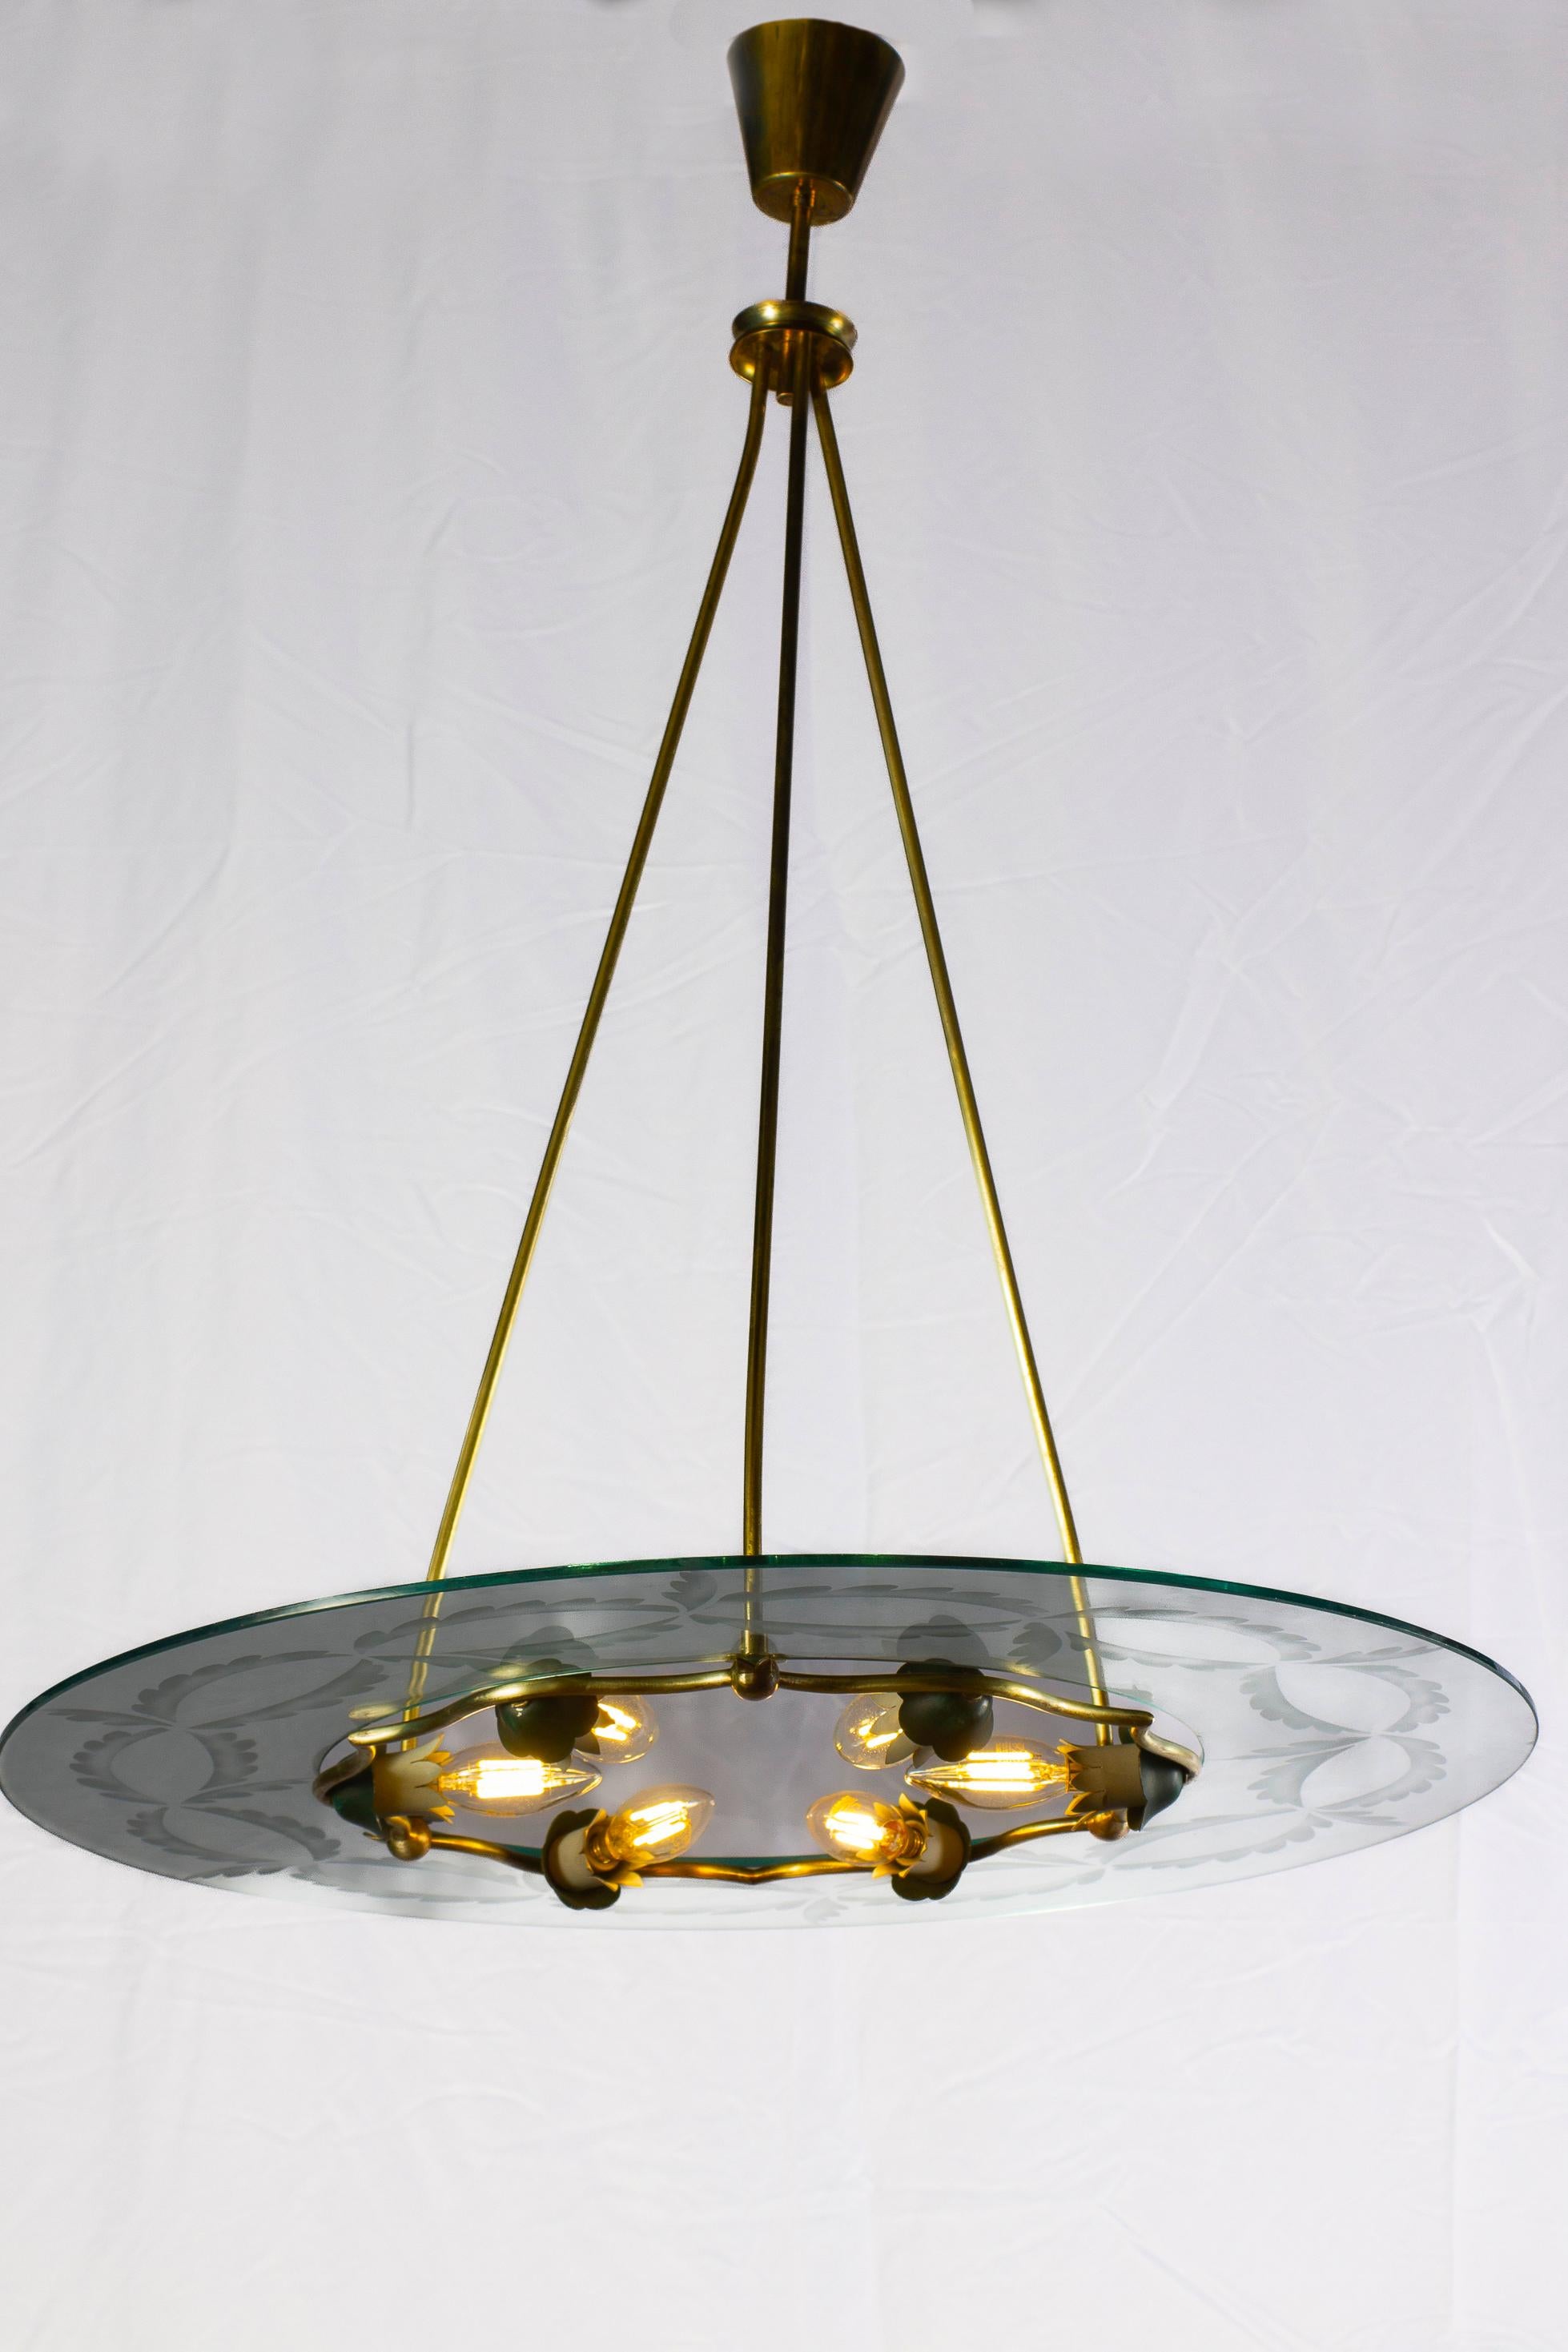 Amazing pendant with finely hand chiseled glass with hibiscus motifs. Elegant brass frame in excellent vintage condition. The disc centered by six  E 14 light bulbs, up to 40 watts per bulb.
This piece is attributed to Fontana Arte designed by